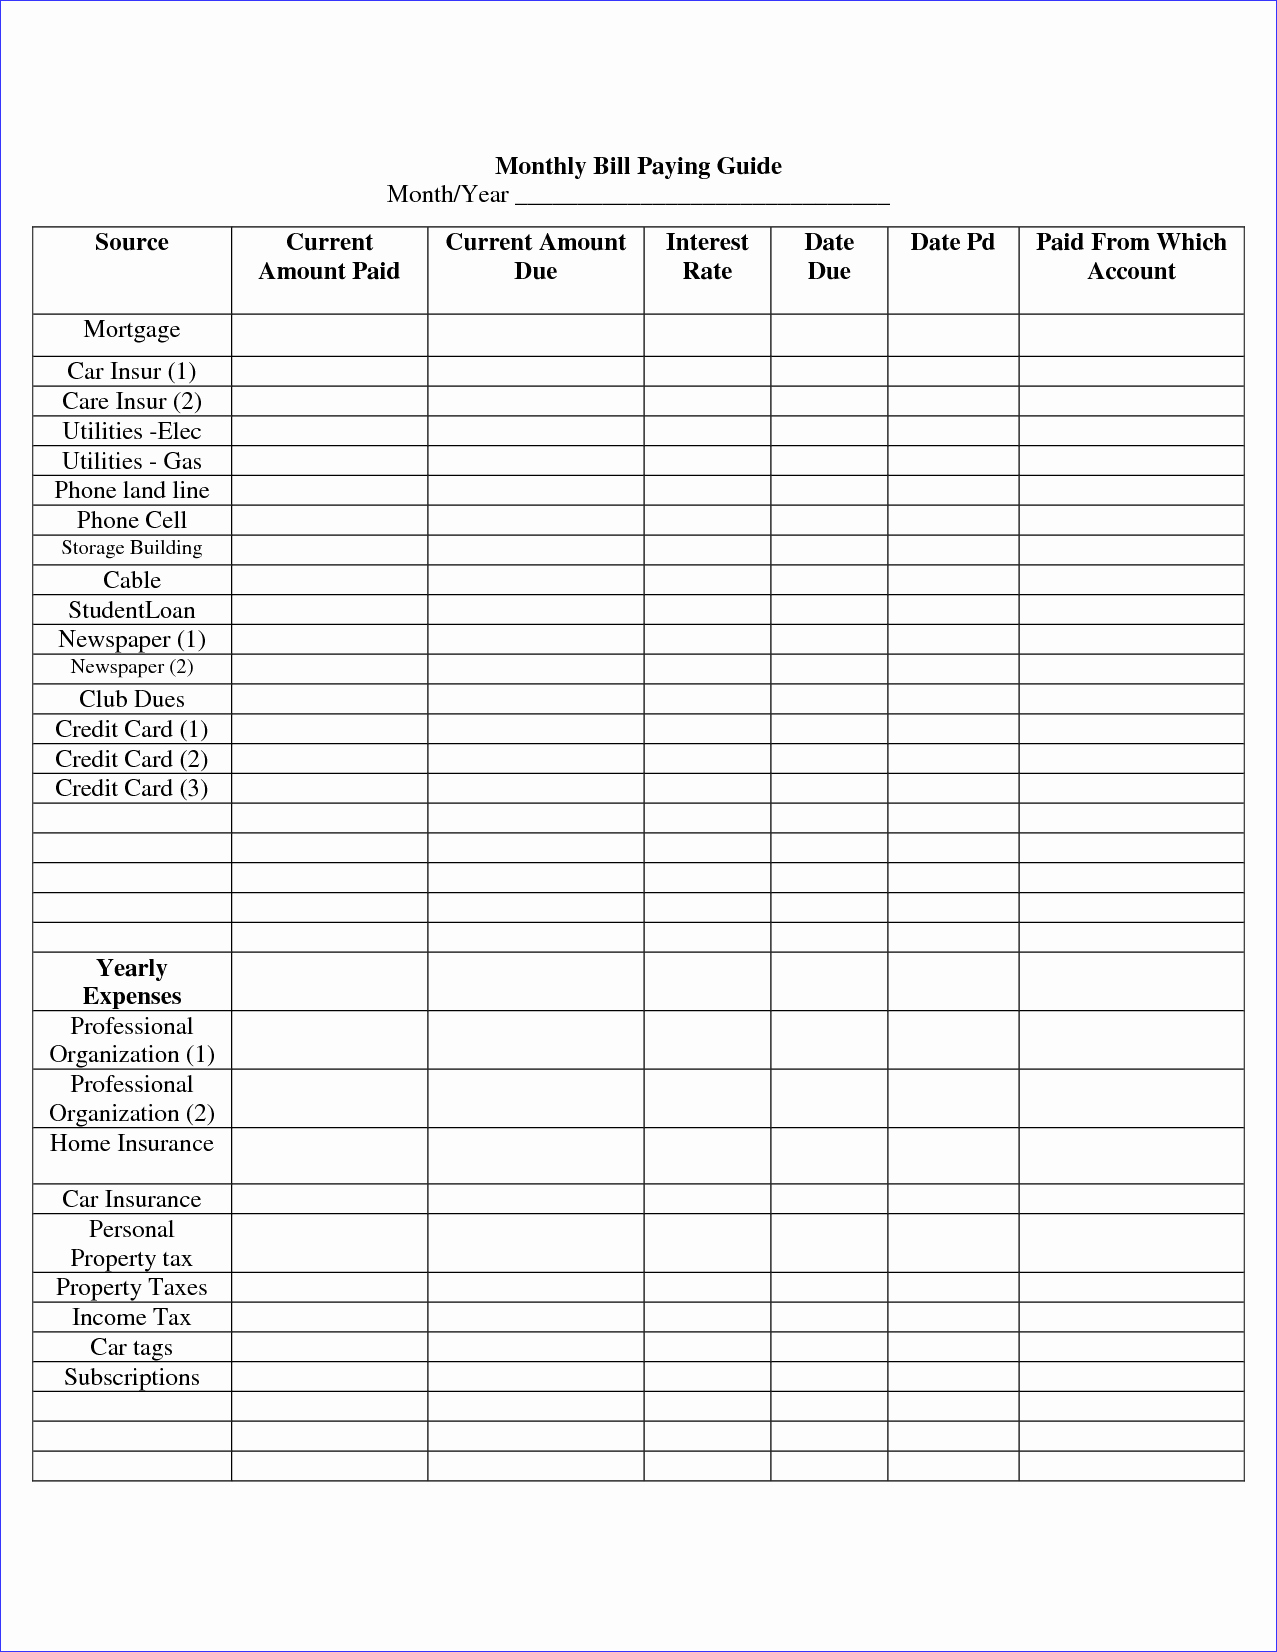 Monthly Bill organizer Template Excel Awesome Simple Bill and Payment organizer Templates for Your